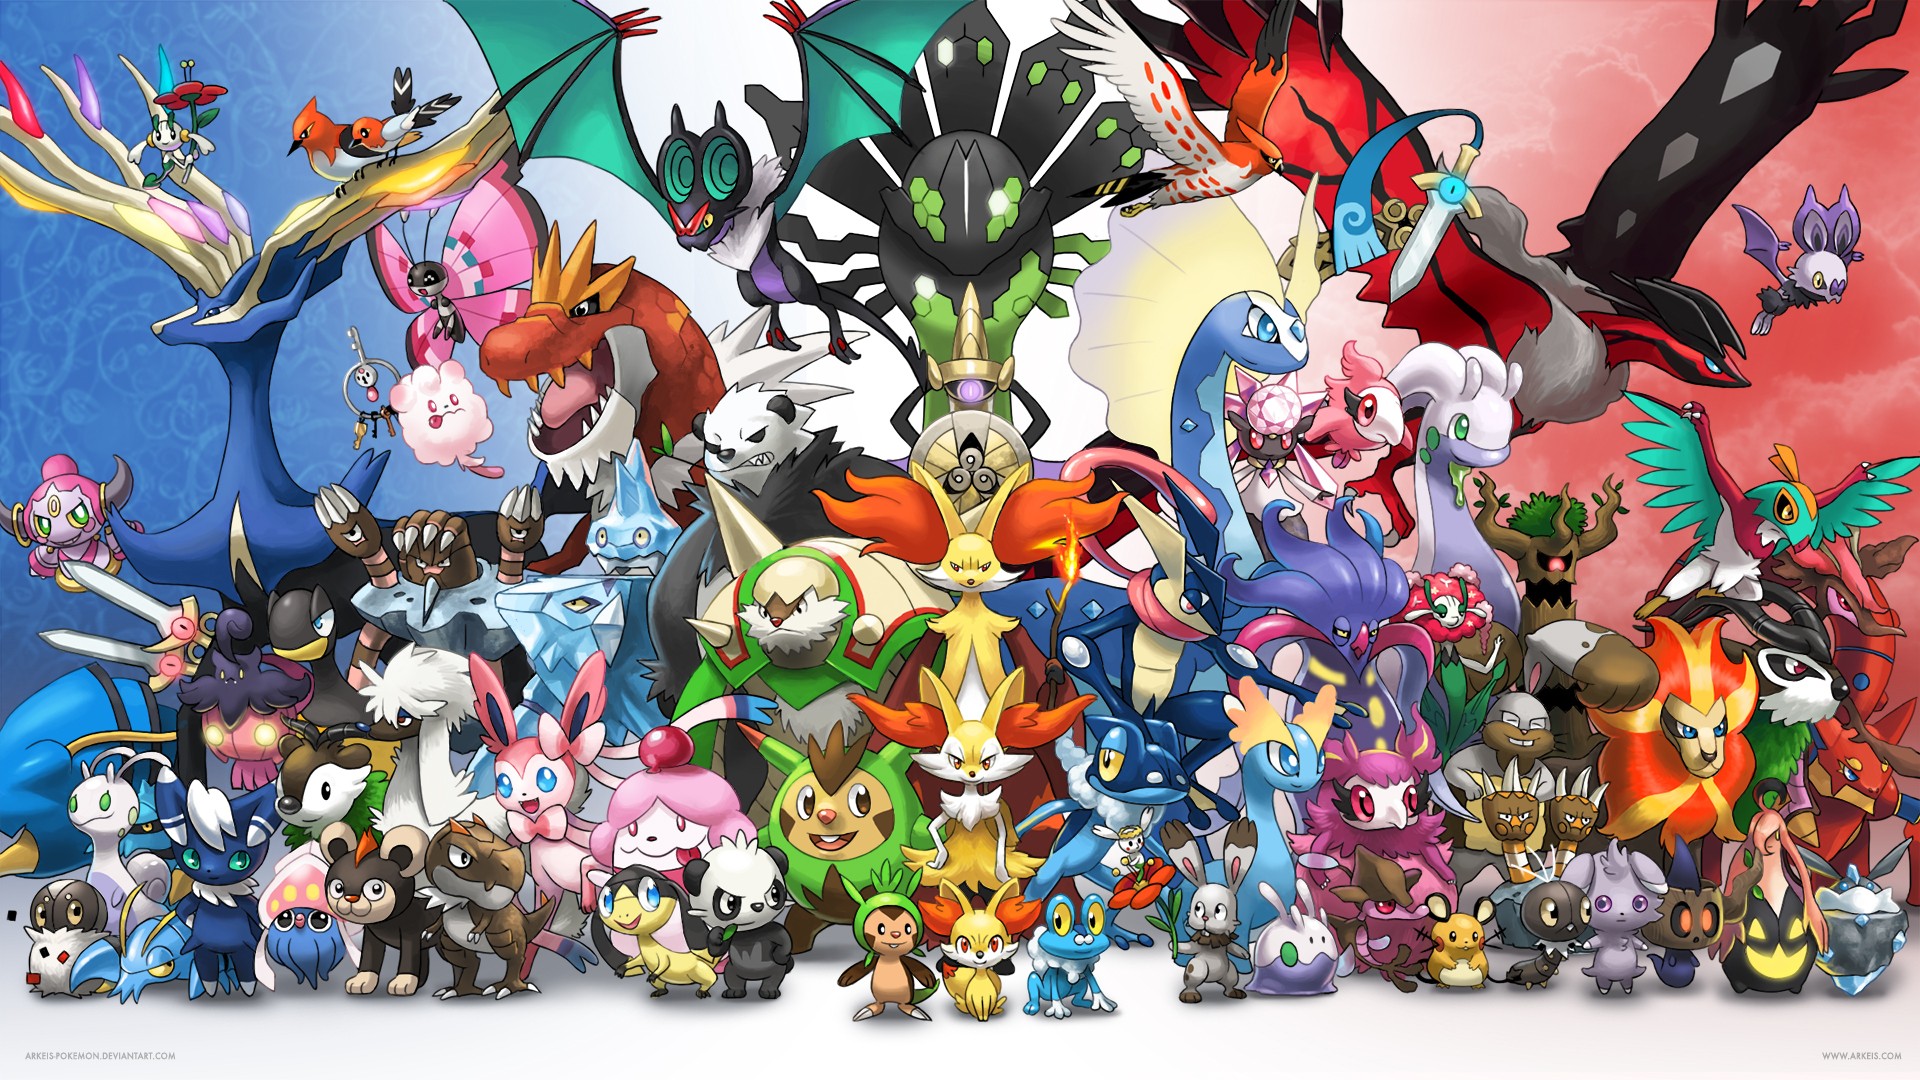 Pokemon Wallpaper with high-resolution 1920x1080 pixel. You can use this wallpaper for your Windows and Mac OS computers as well as your Android and iPhone smartphones